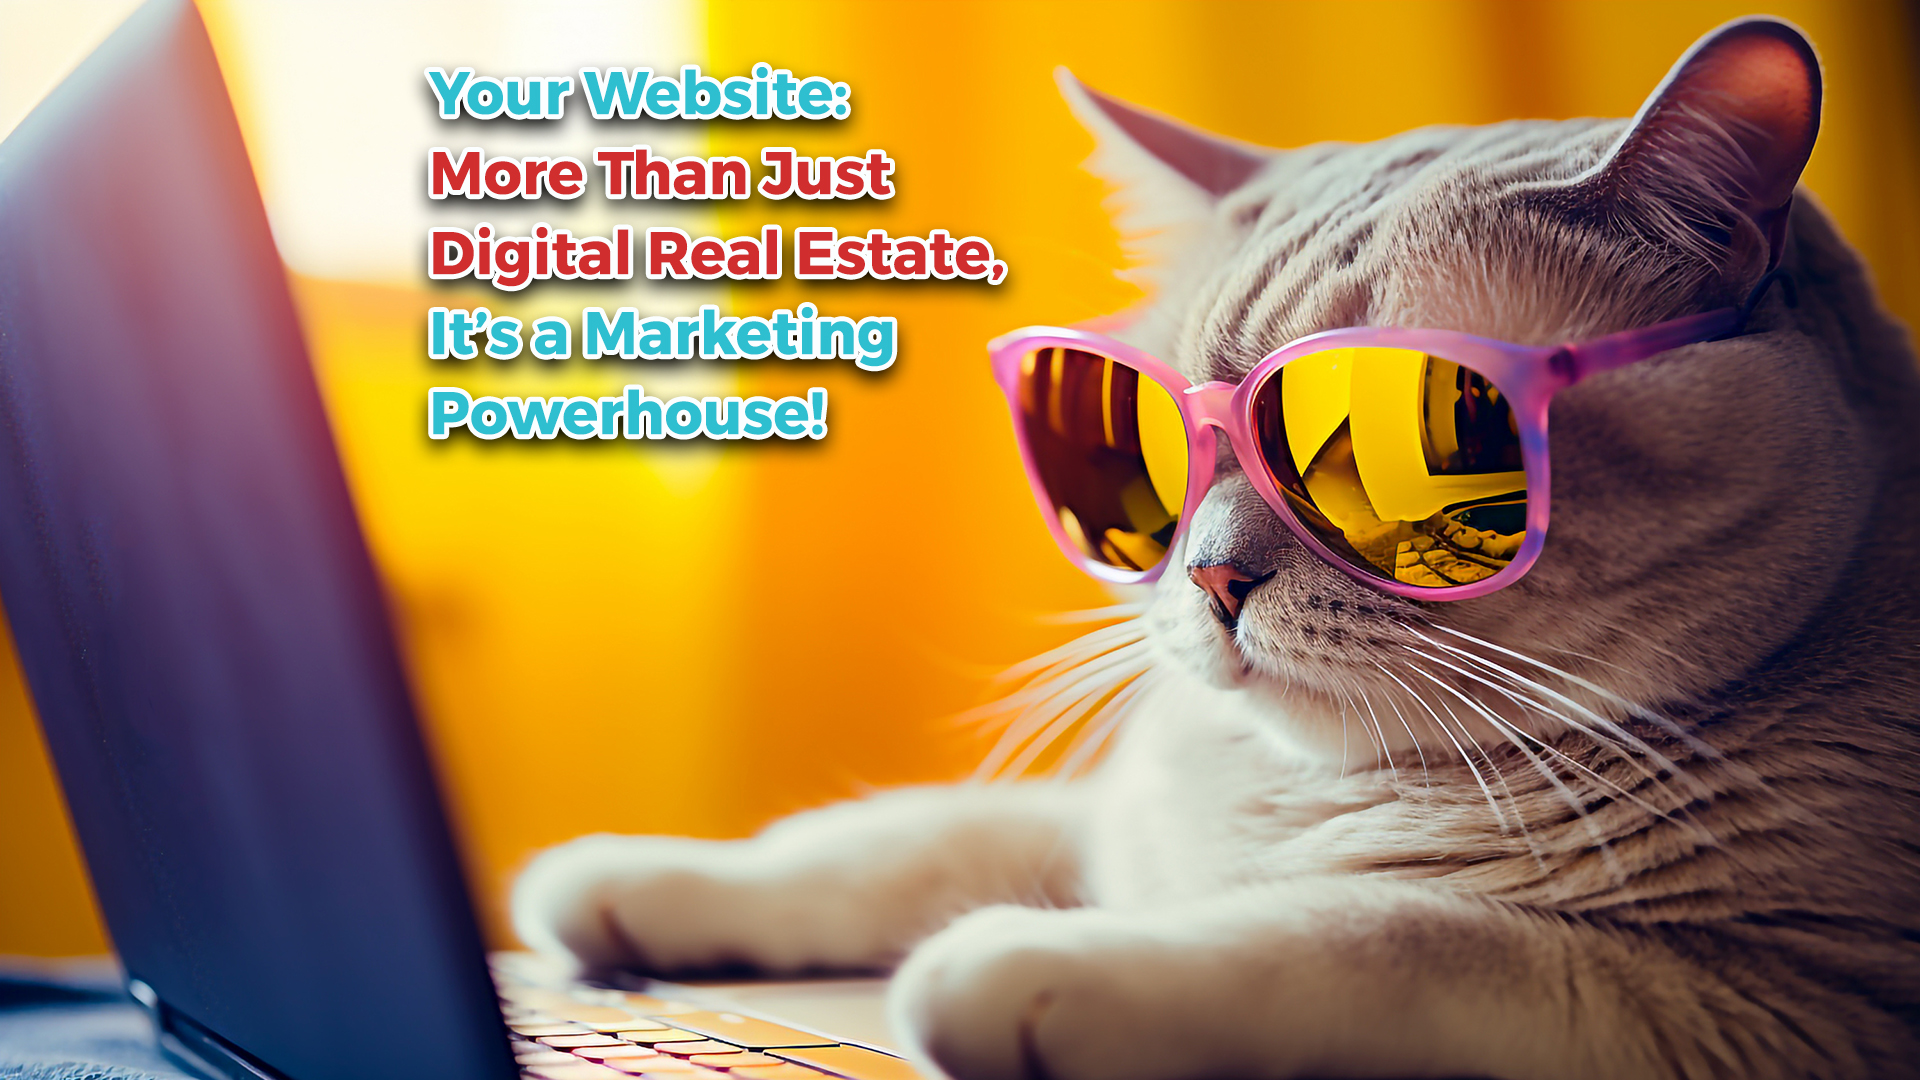 Your Website: More Than Just Digital Real Estate, It’s a Marketing Powerhouse!